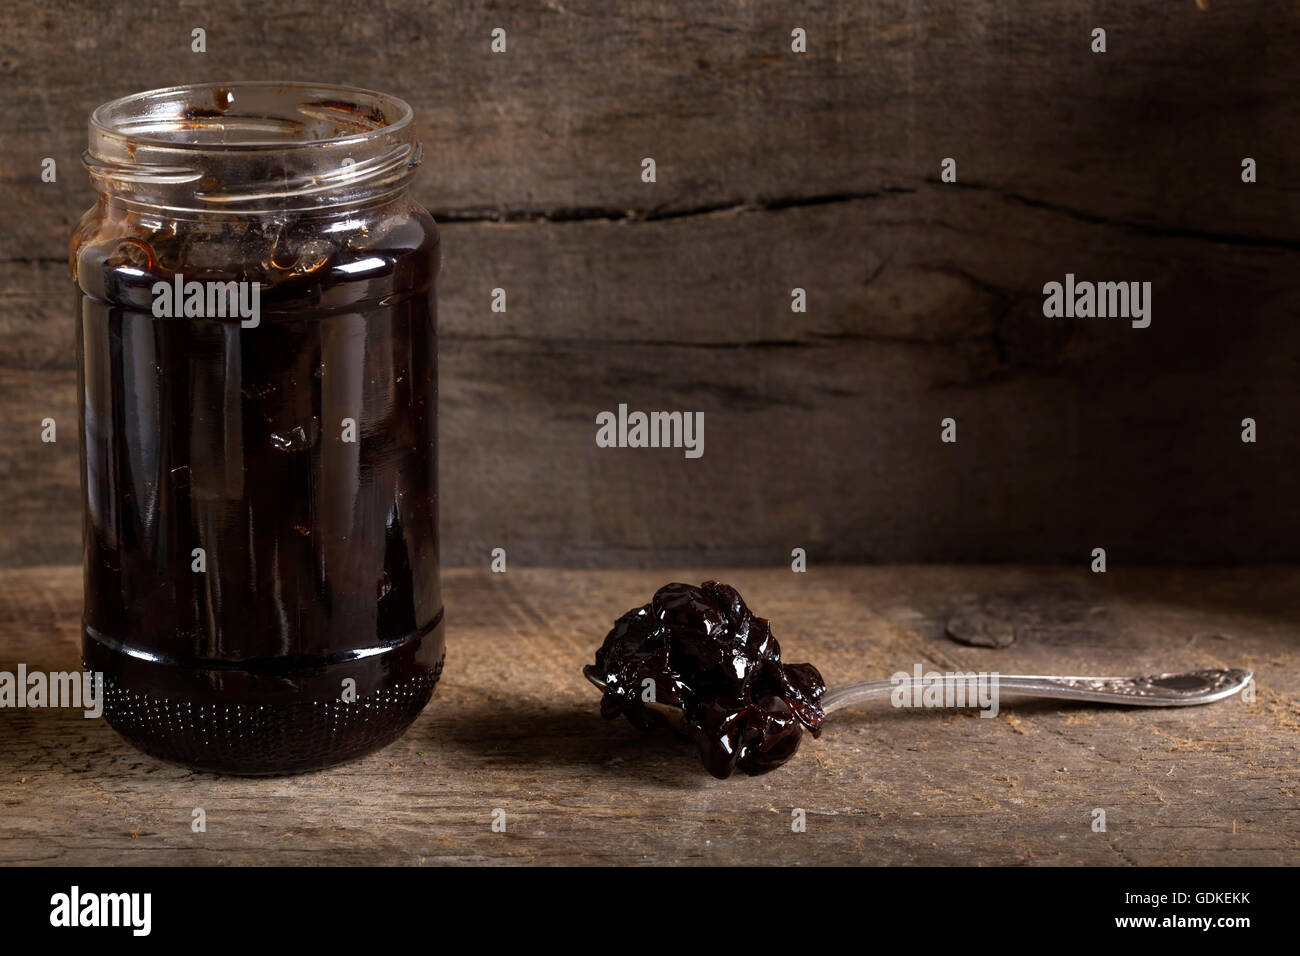 Cherry jam in a preserving glass and spoon over old wooden rustic background Stock Photo